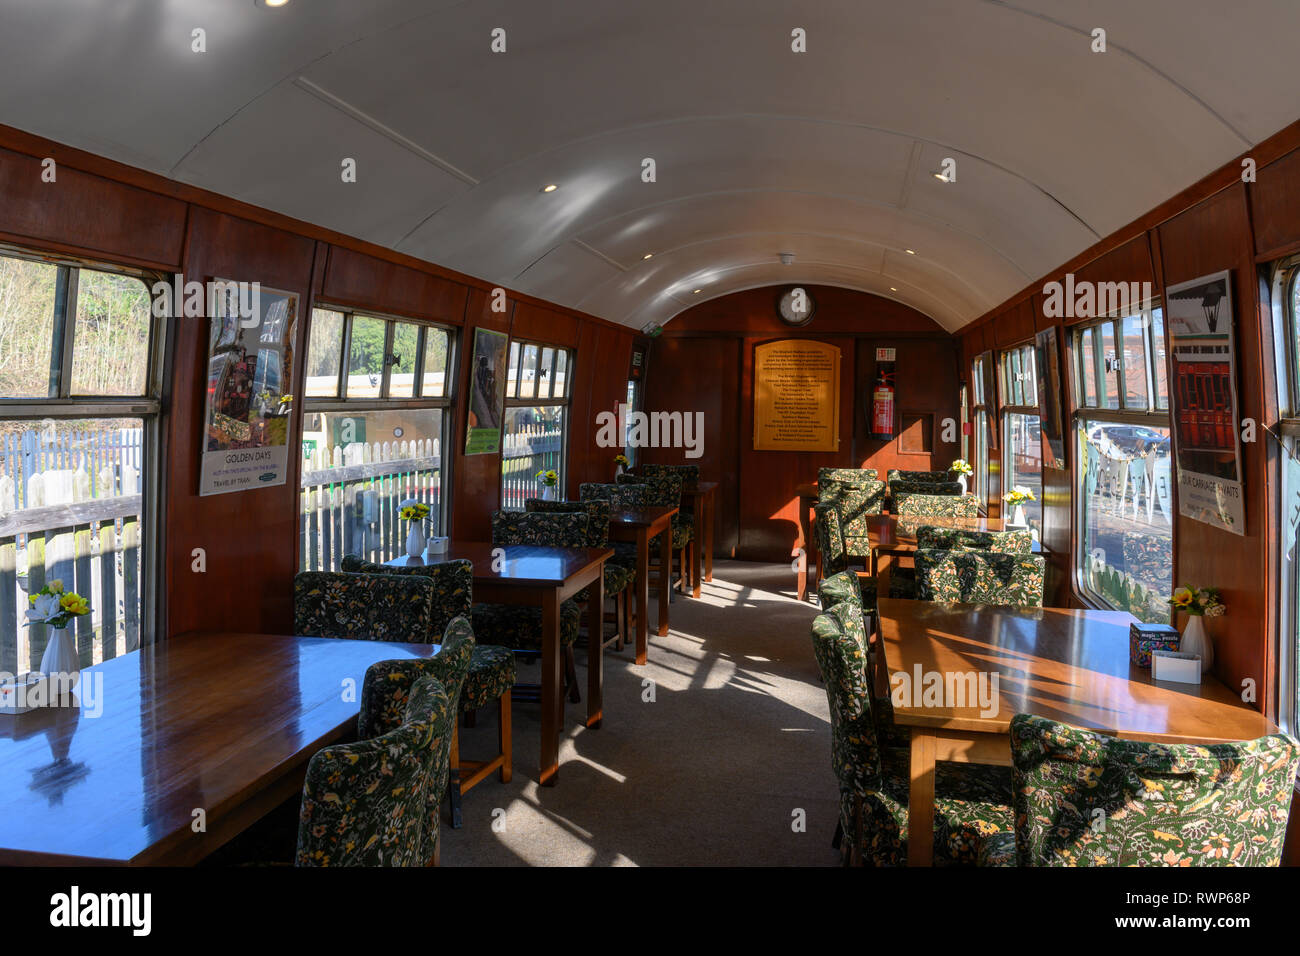 Interior of an old passenger train carriage used as a tea room on the Bluebell Railway at East Grinstead Railway Station, West Sussex, UK. Stock Photo